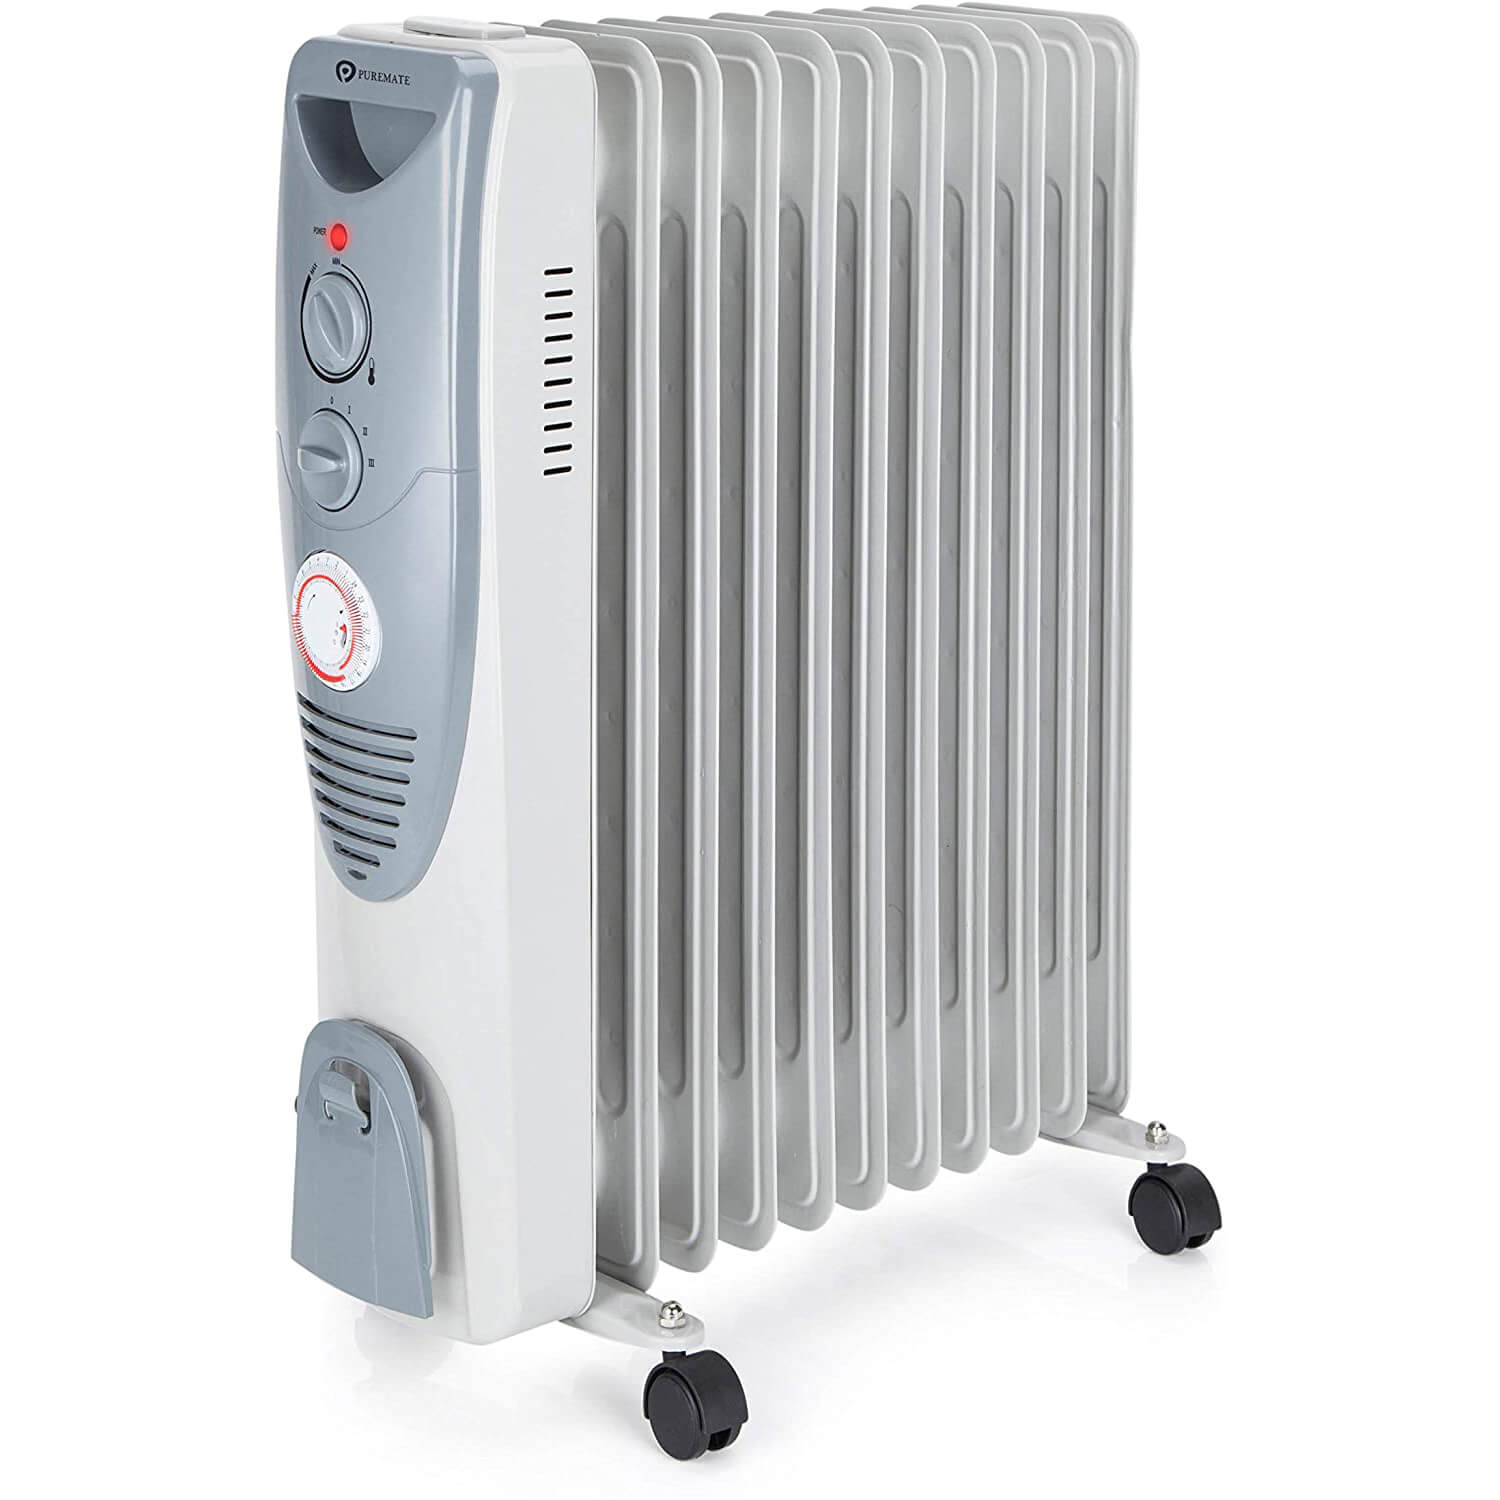 PureMate Oil Filled Radiator, 2500W/2.5KW